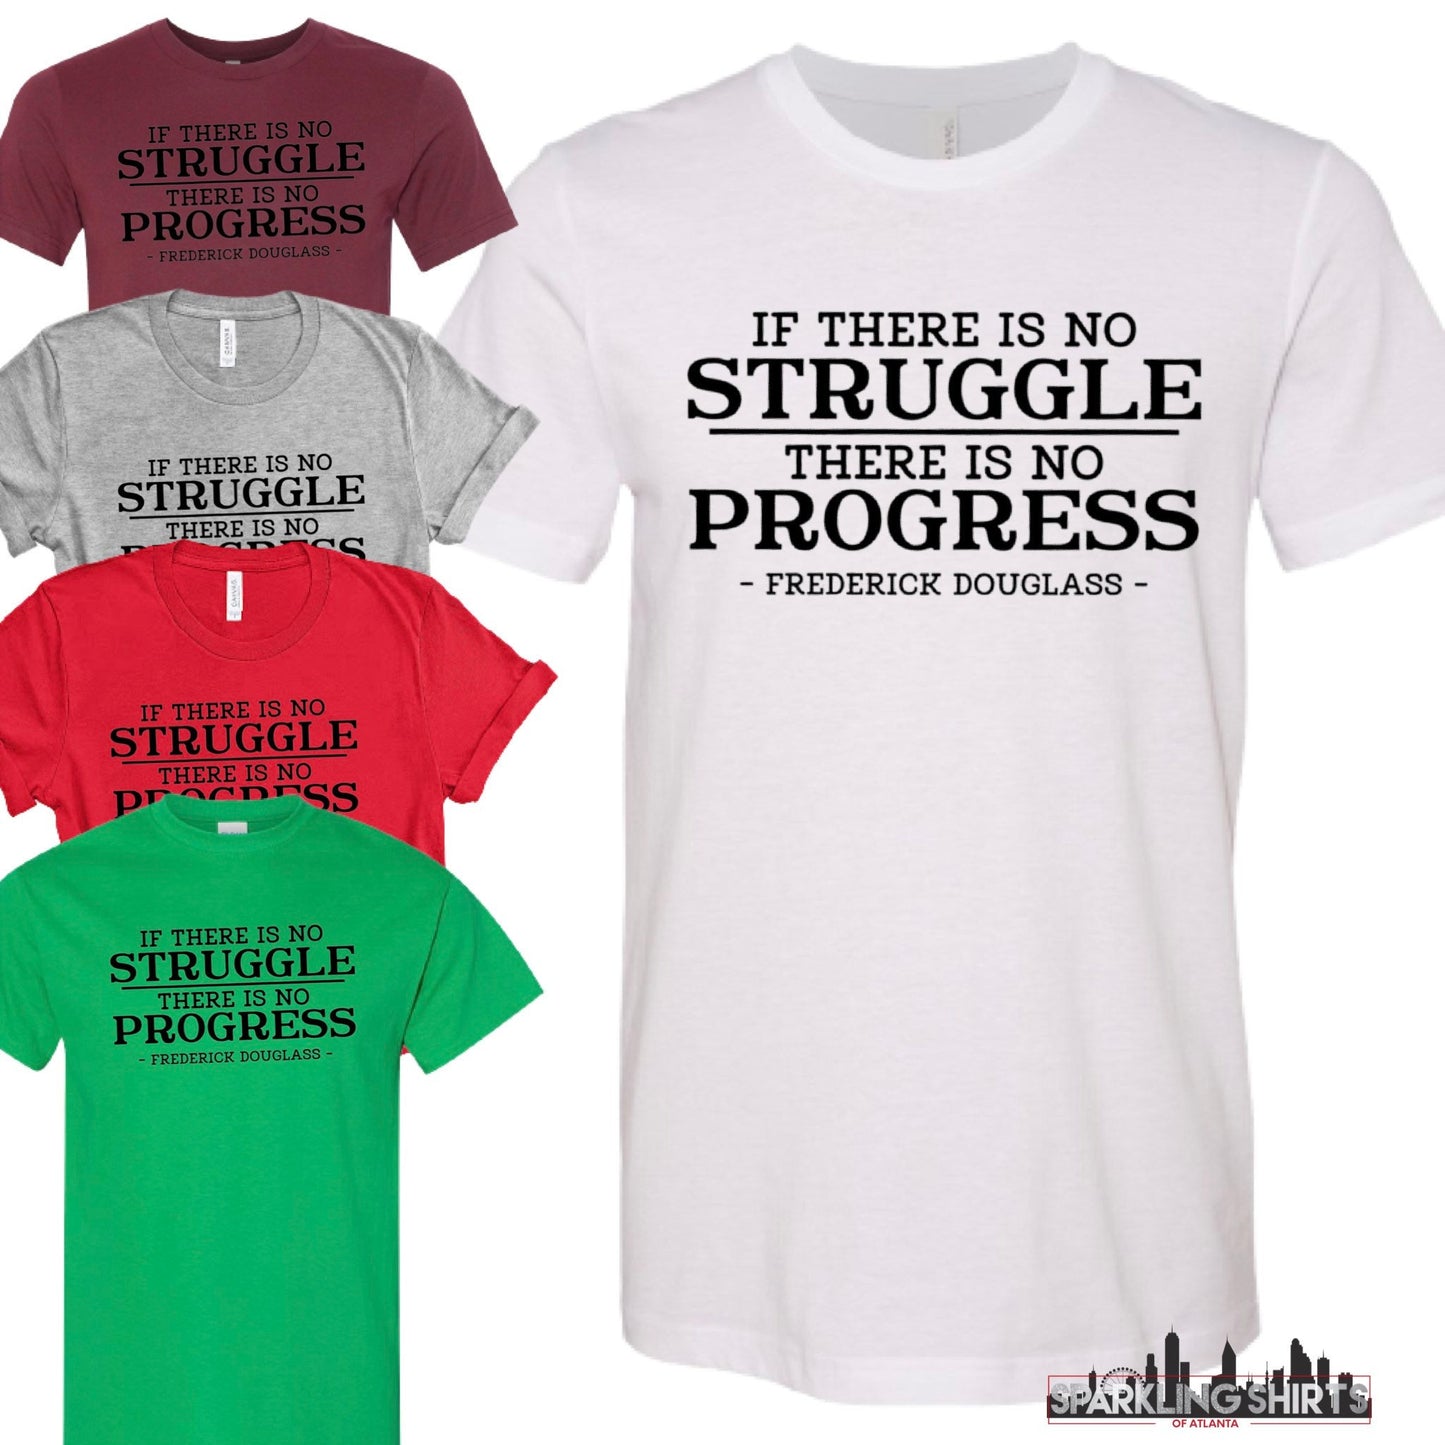 If There Is No Struggle - There Is No Progress|Frederick Douglass| Black History| History Lesson| Black History Month| Graphic T-shirt